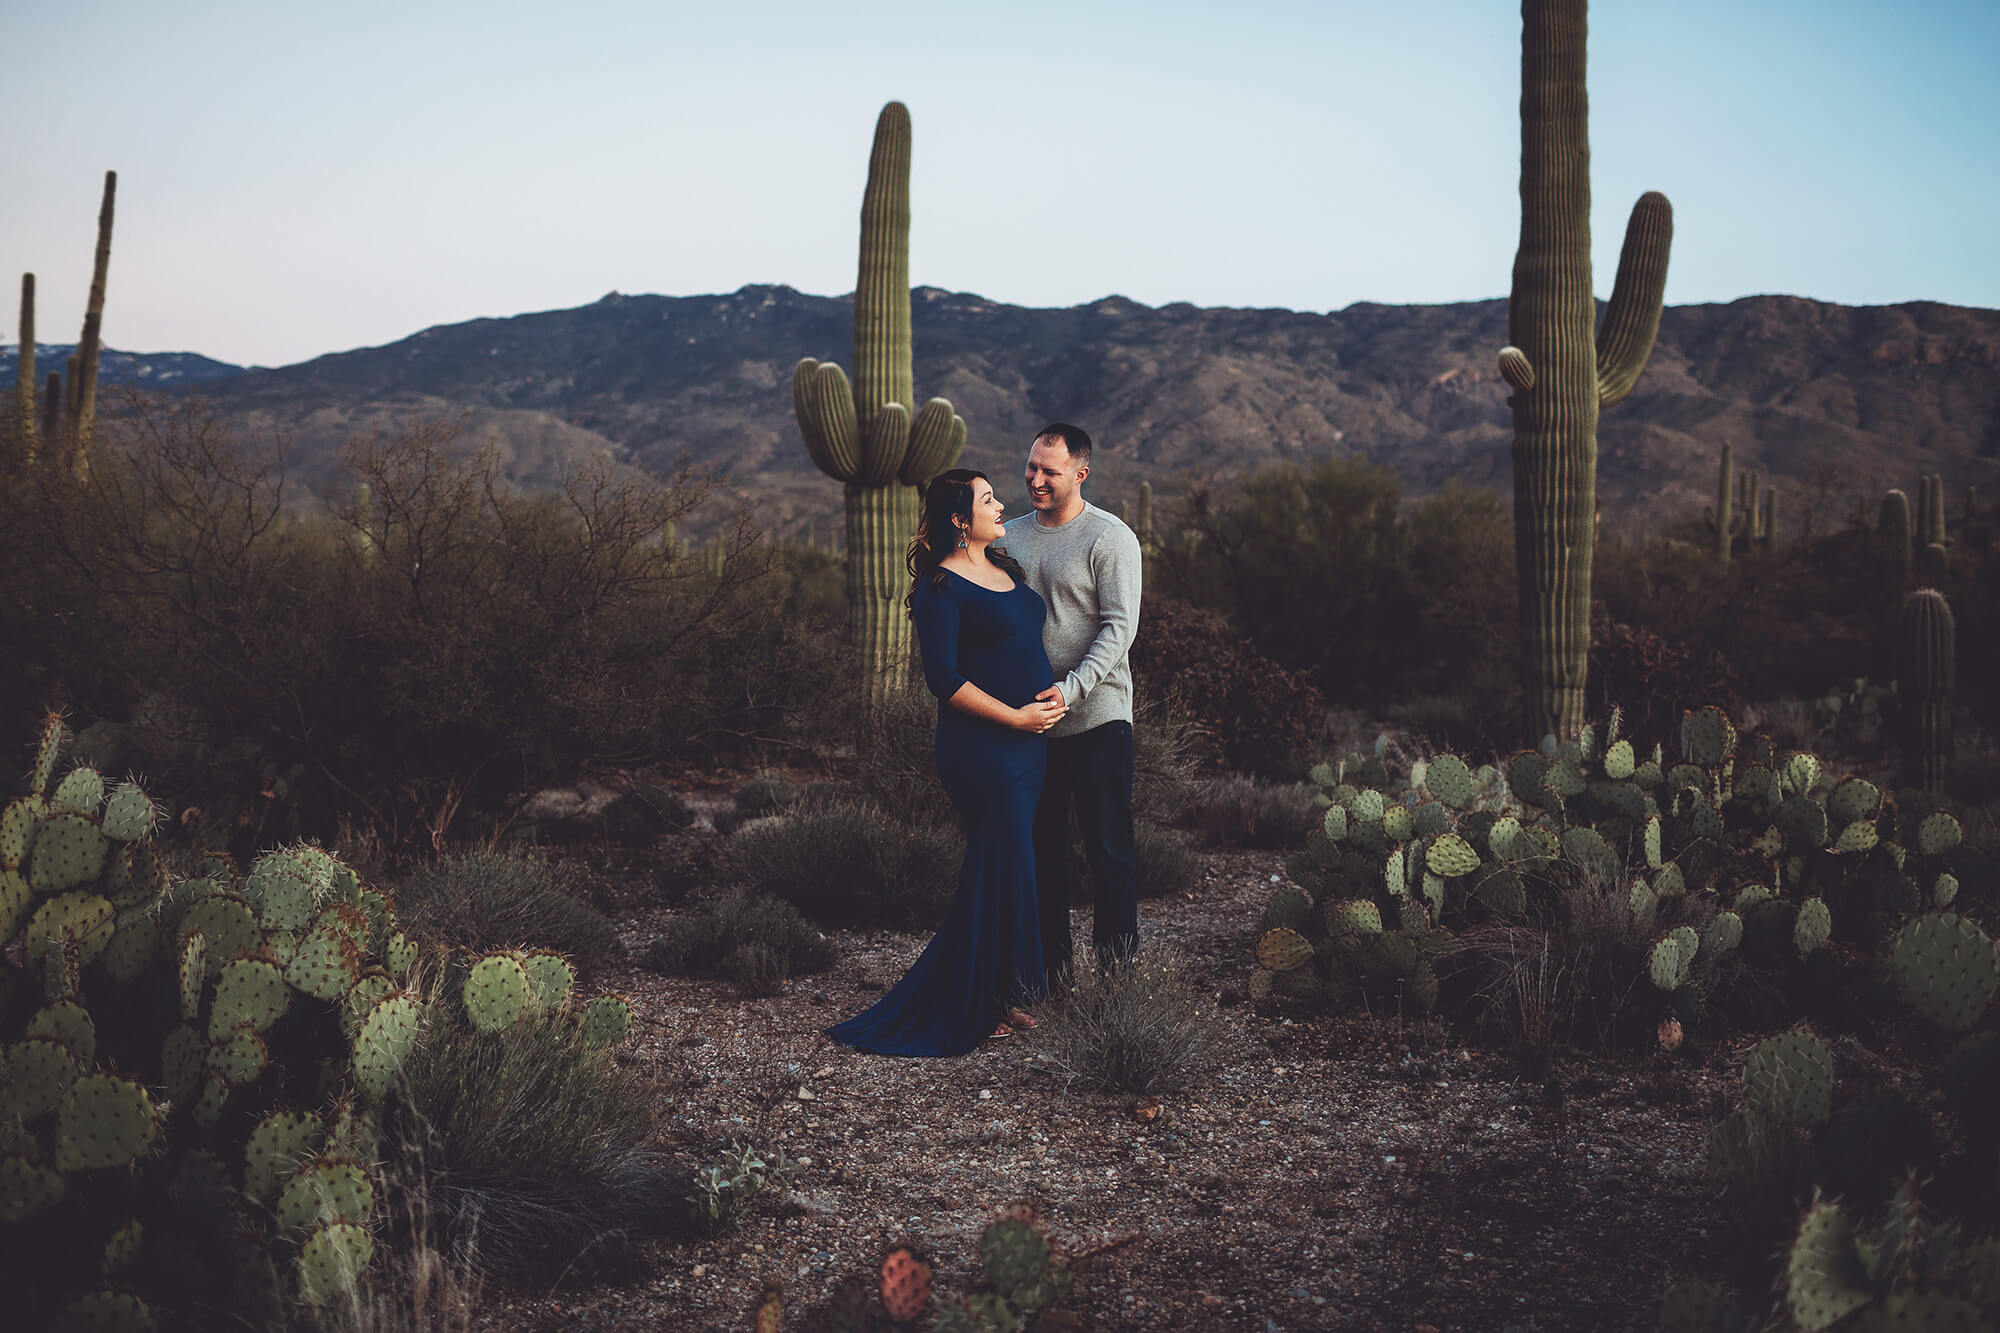 A final shot of Alicia and her husband with the Rincon mountains to their backs.